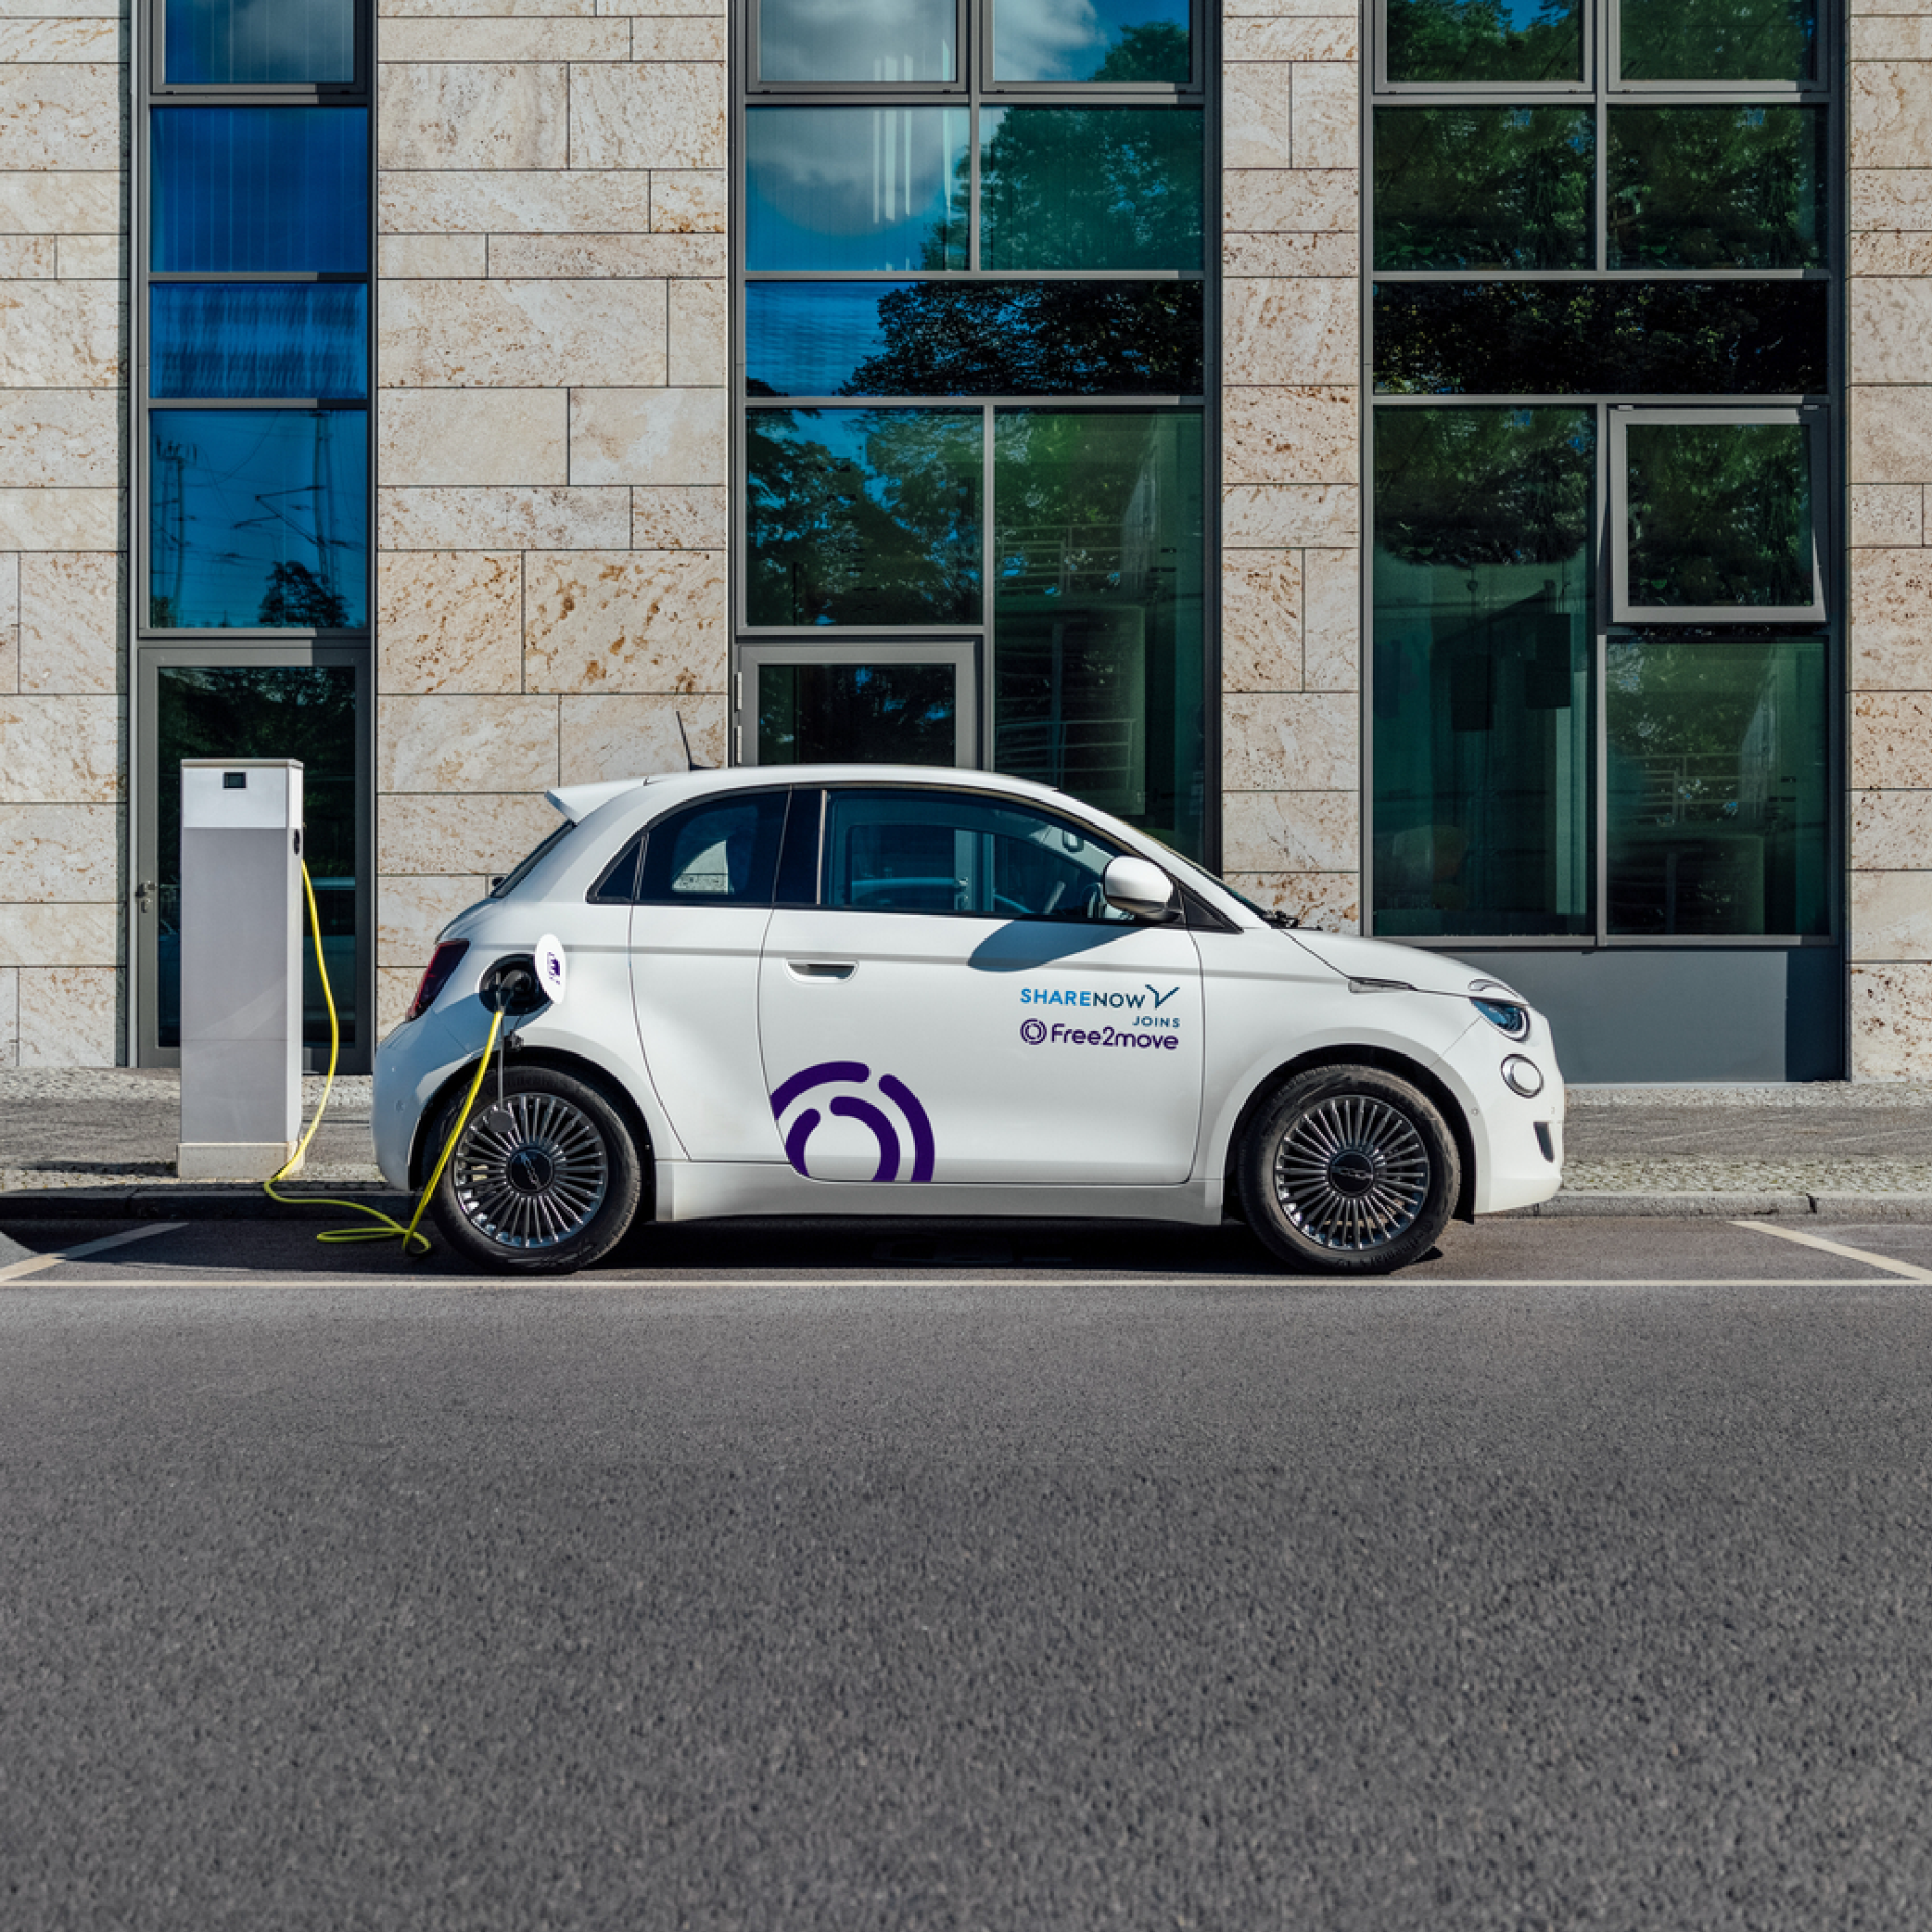 image of Free2move carsharing